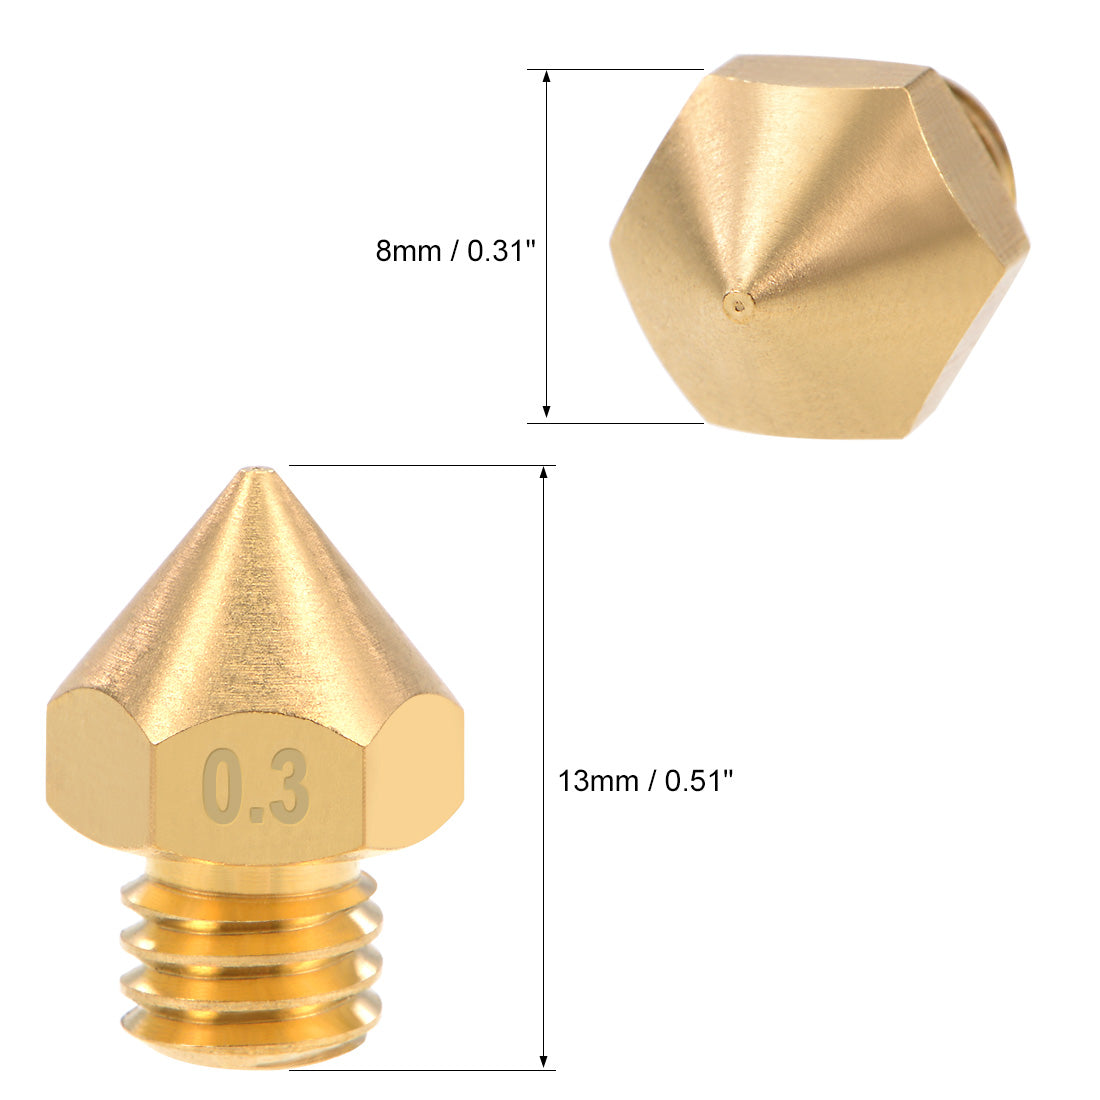 uxcell Uxcell 0.3mm 3D Printer Nozzle Head M6 for MK8 1.75mm Extruder Print, Brass 4pcs